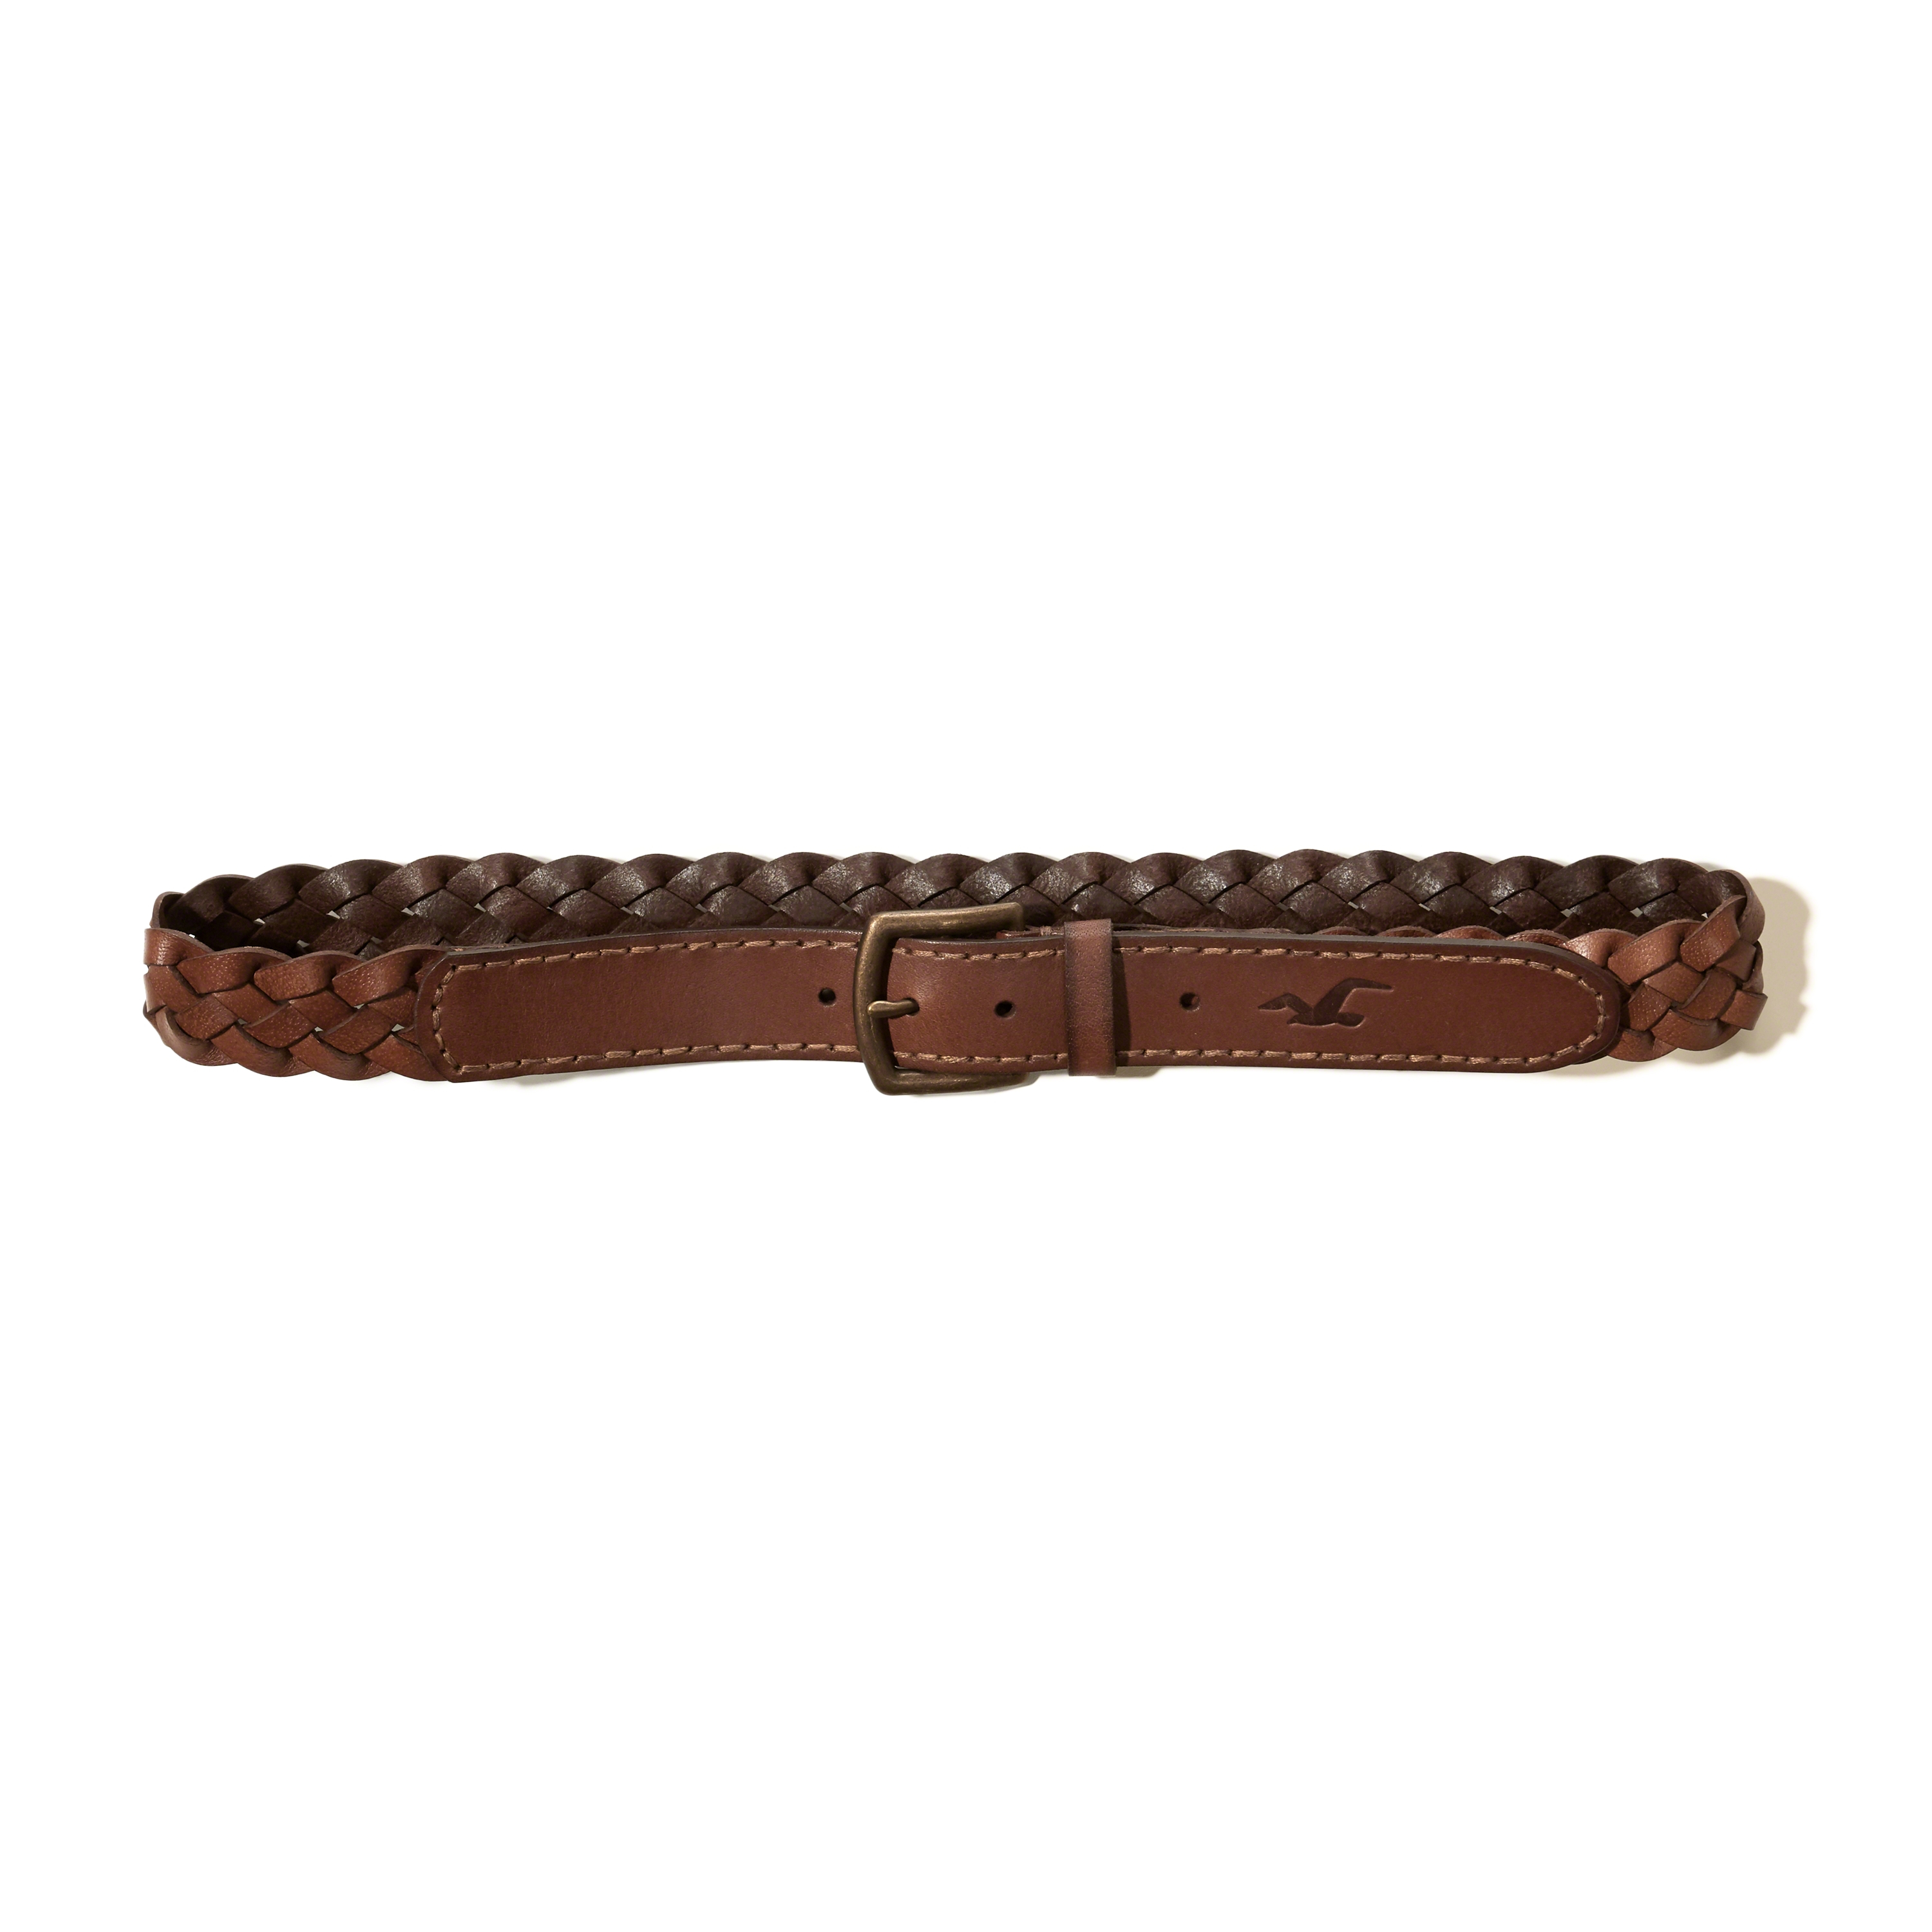 Lyst - Hollister Braided Leather Belt in Brown for Men